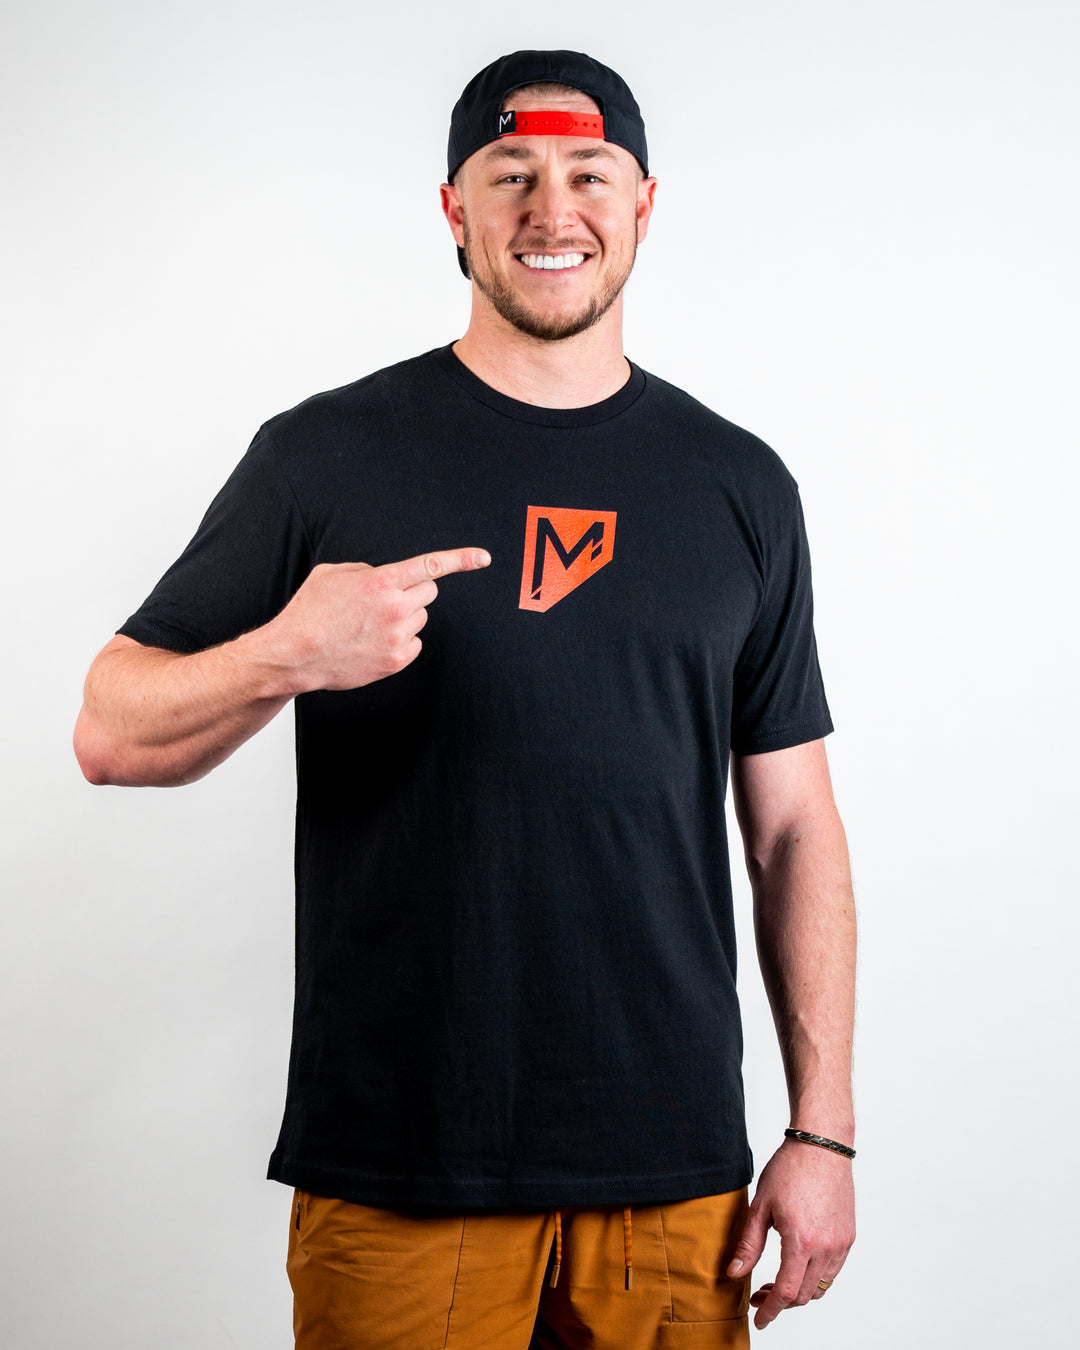 Tosh wearing Momentum Apparel Shield Red Tee